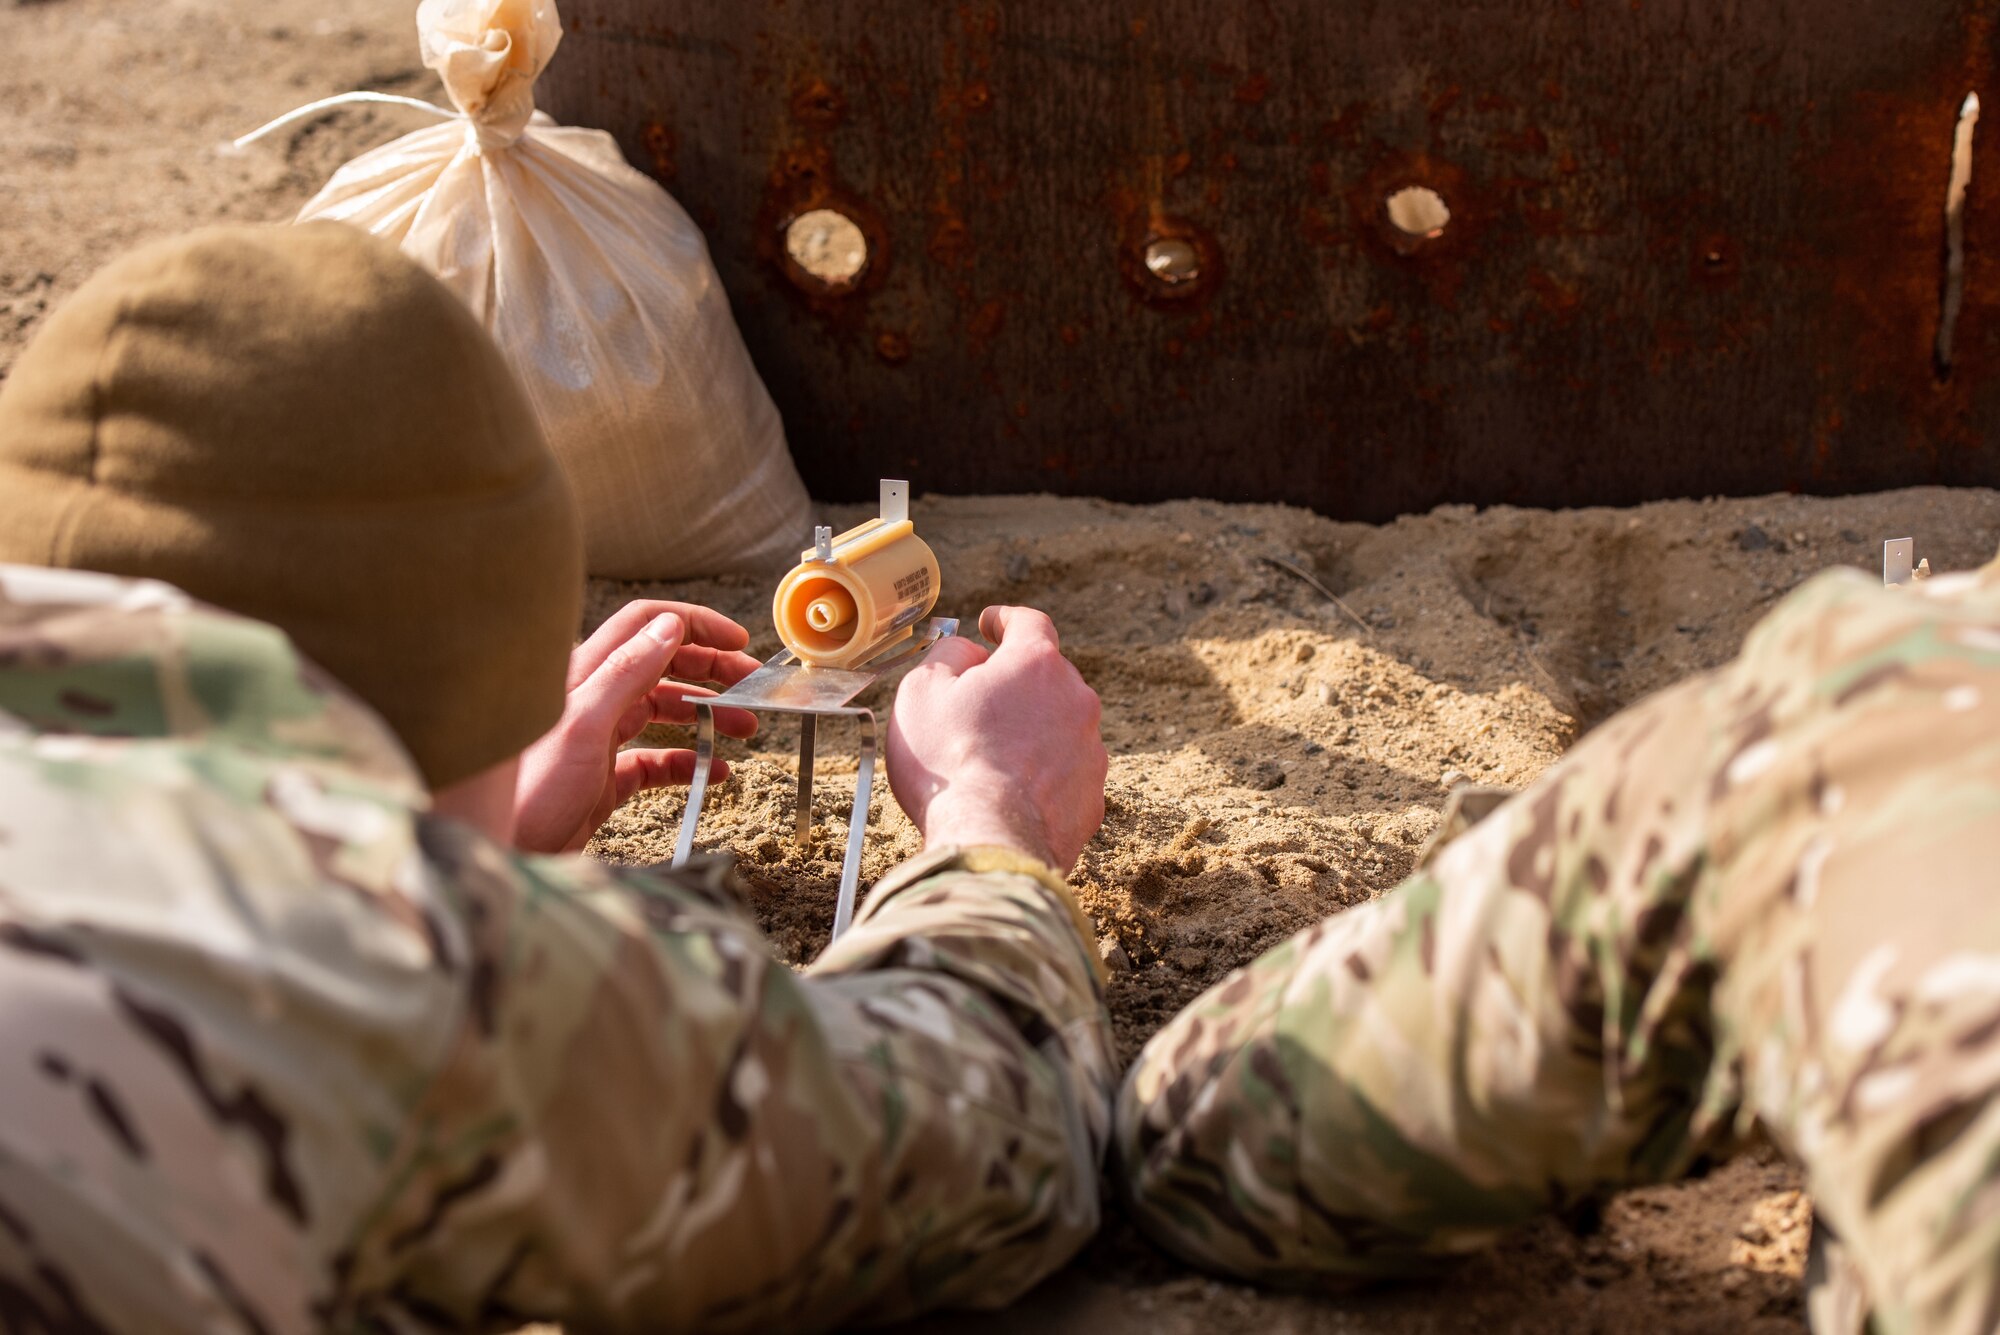 Airman 1st Class James Franklin, 51st Civil Engineer Squadron Explosive Ordnance Disposal (EOD) technician, sets up a shaped Composition 4 (C-4) explosive charge at a test site